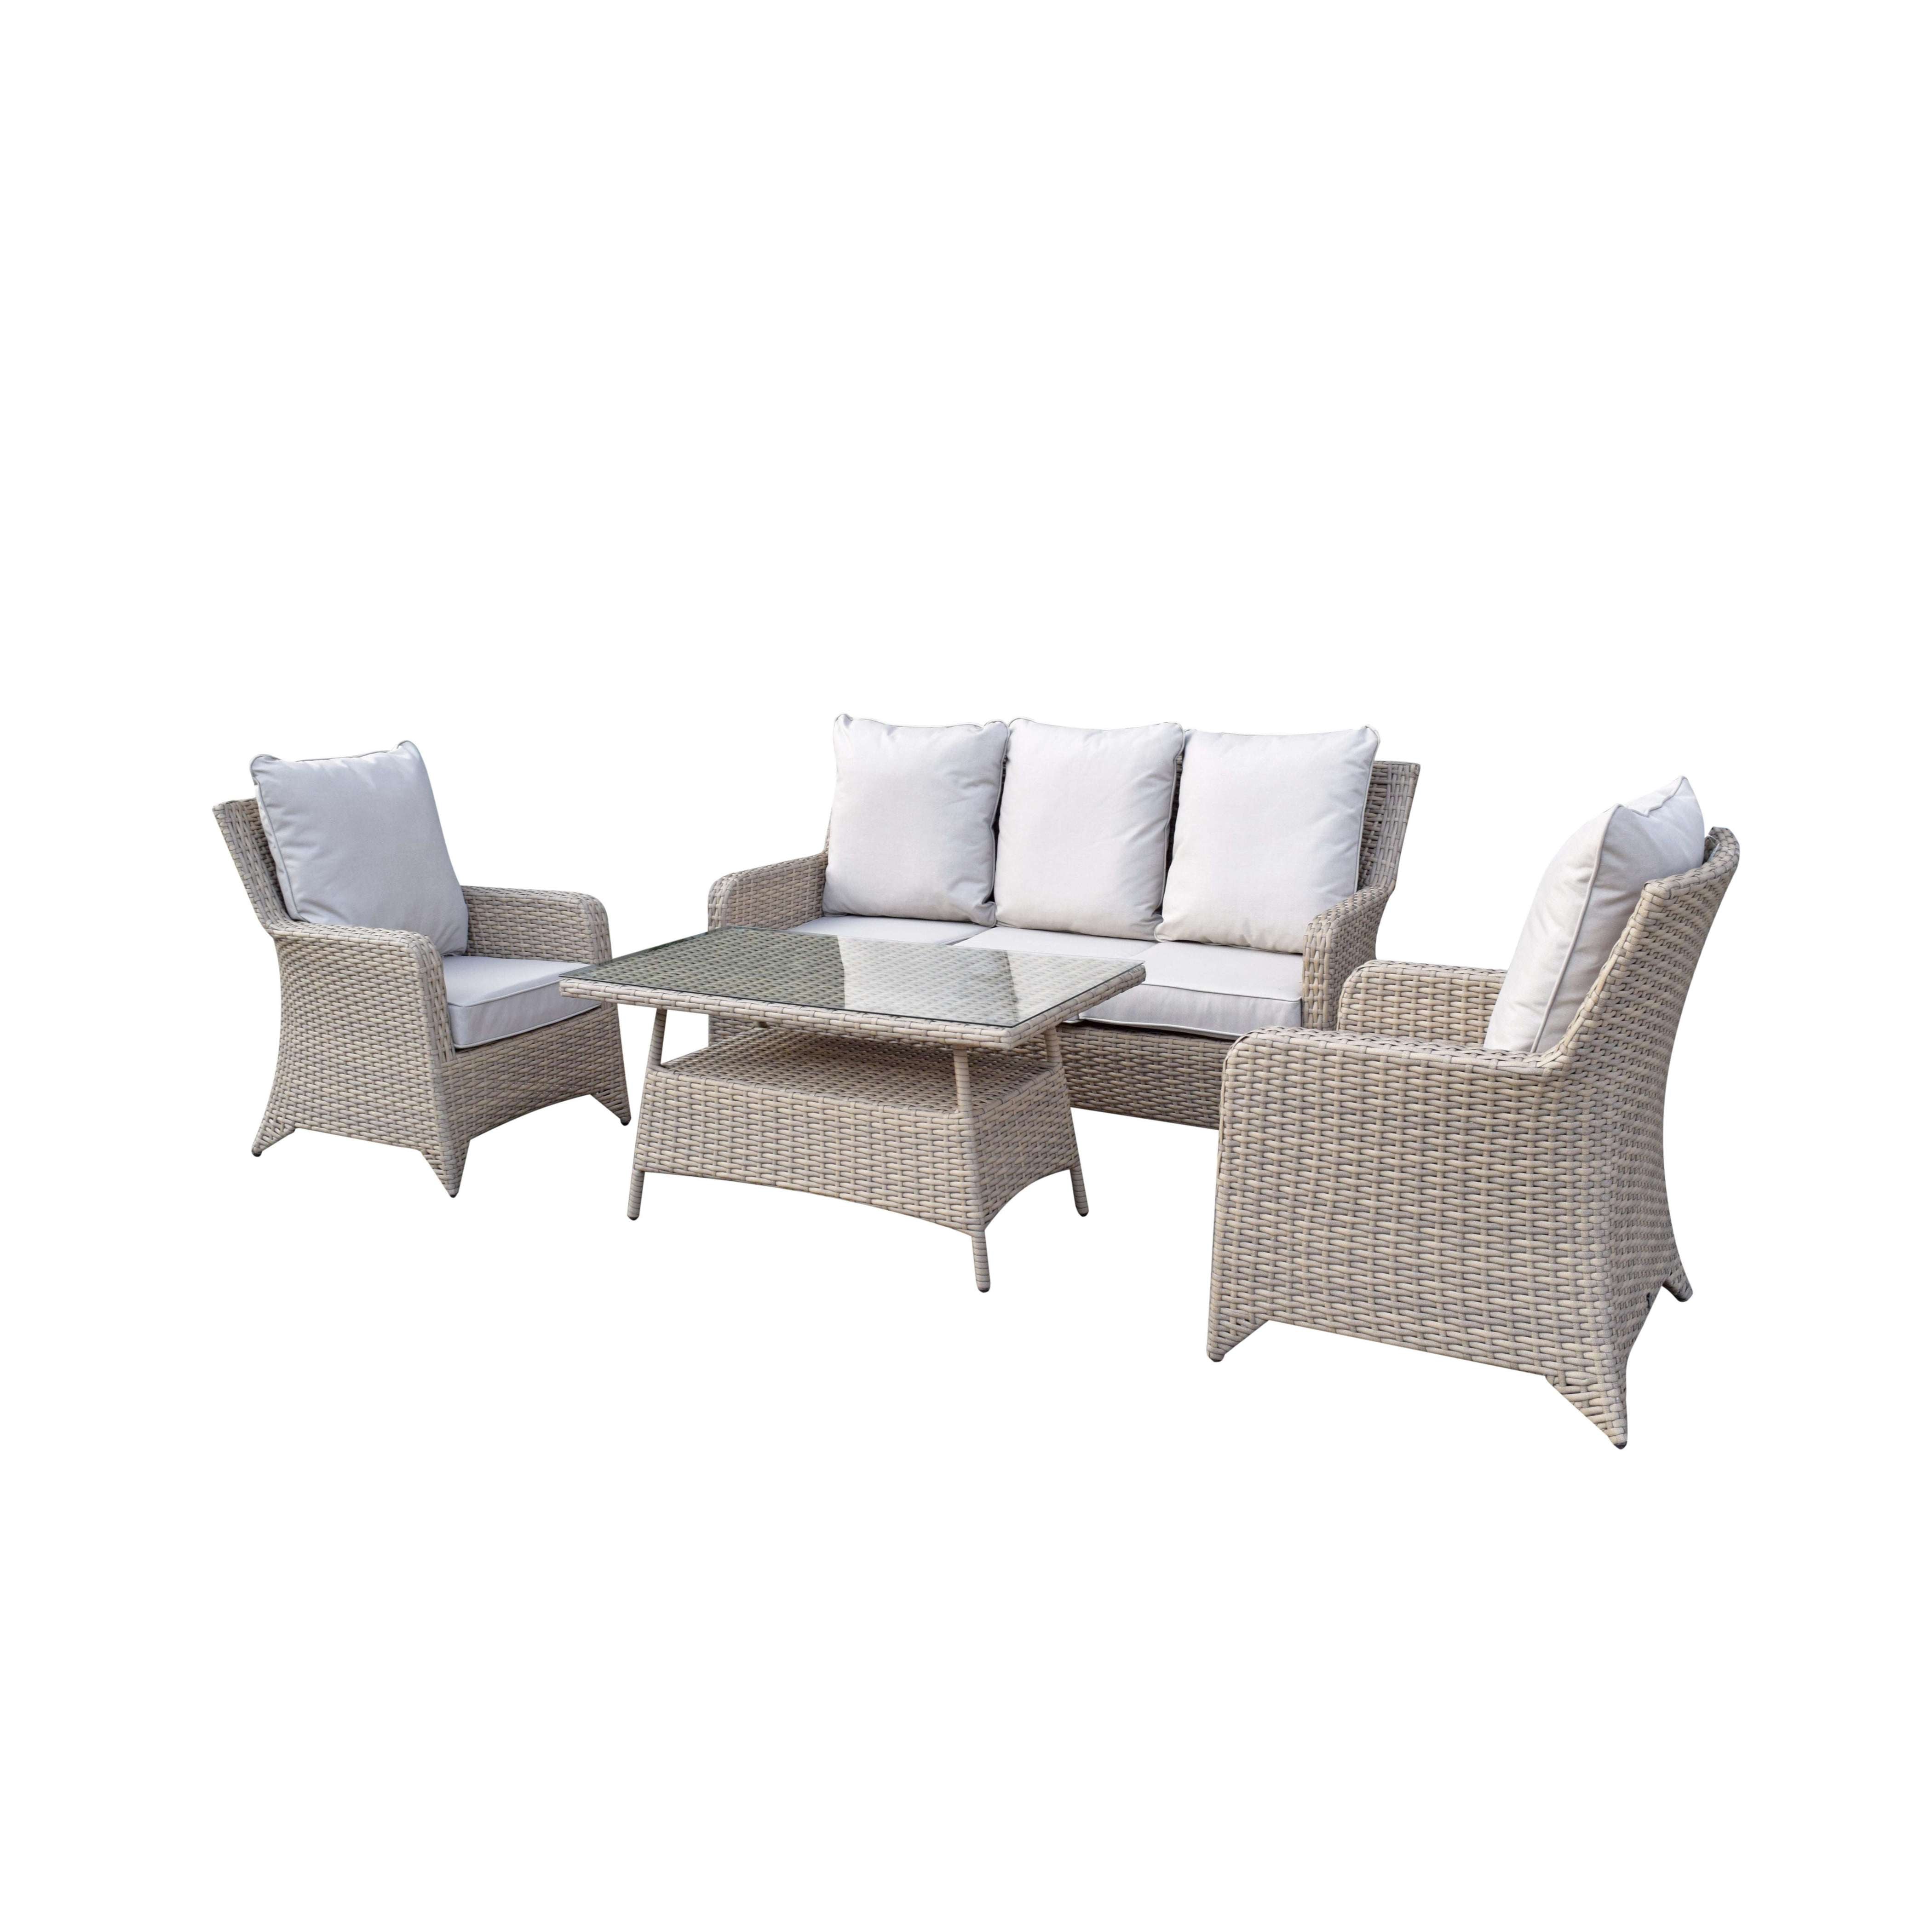 Exceptional Garden:Signature Weave Sarah 5-Seater Sofa Set with New Coffee Table Design - Nature